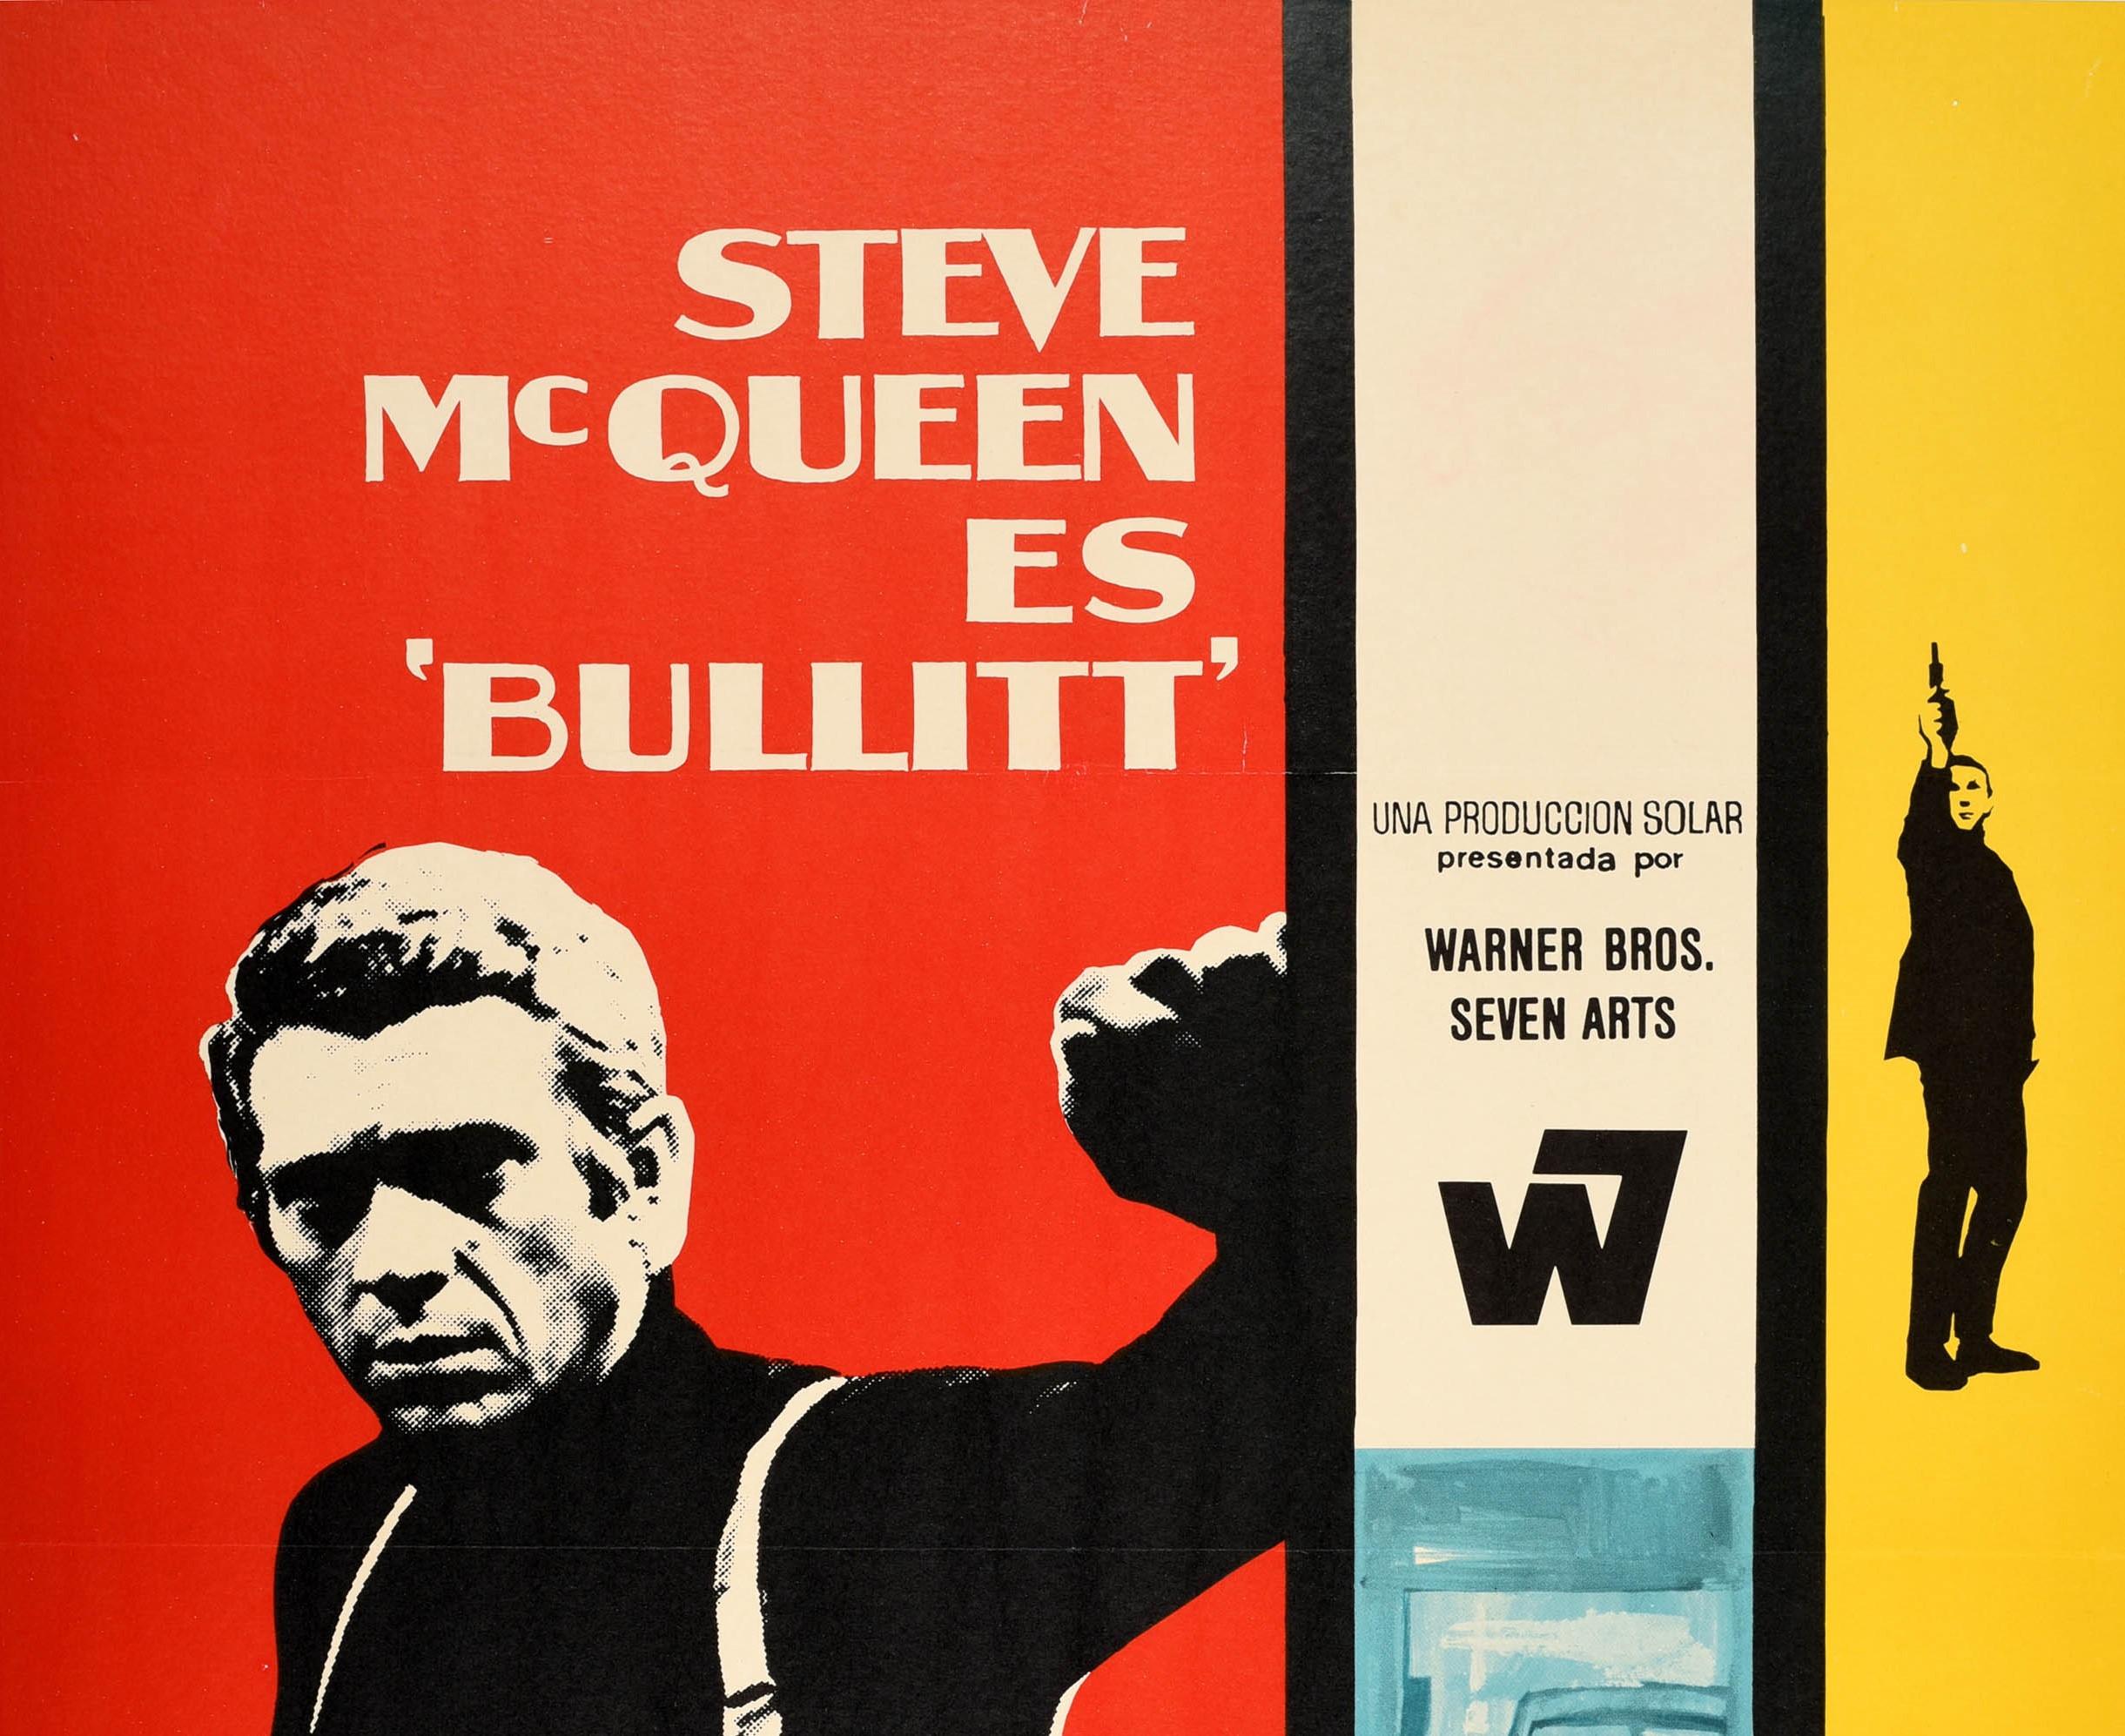 Original vintage movie poster for the Spanish release of the award winning cult classic movie Bullitt (released in the US in 1968) starring Steve McQueen with Robert Vaughn, Jacqueline Bisset and Robert Duvall featuring a great design depicting a